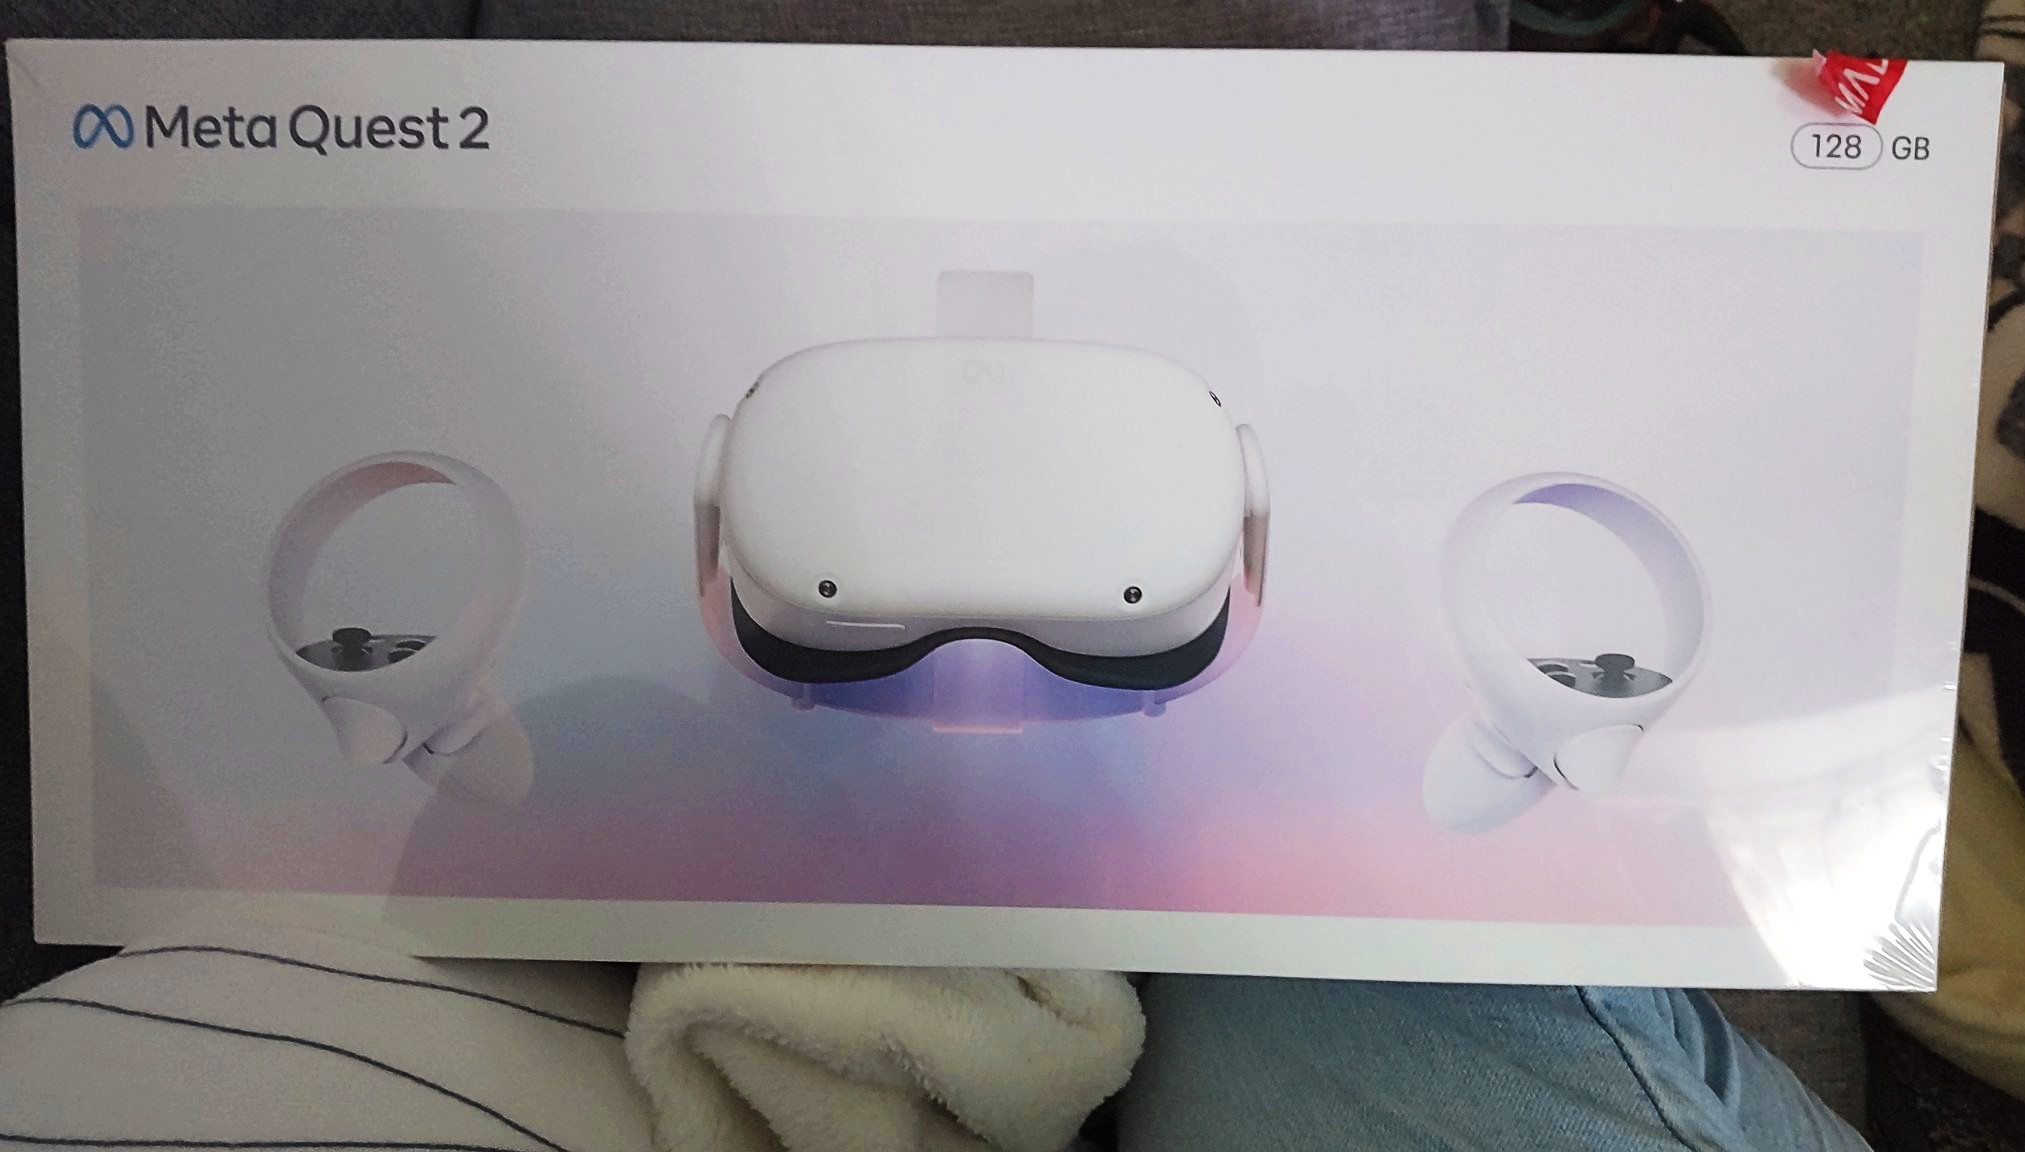 The Oculus Quest 2 is no more, long live the Meta Quest 2 | PCGamesN